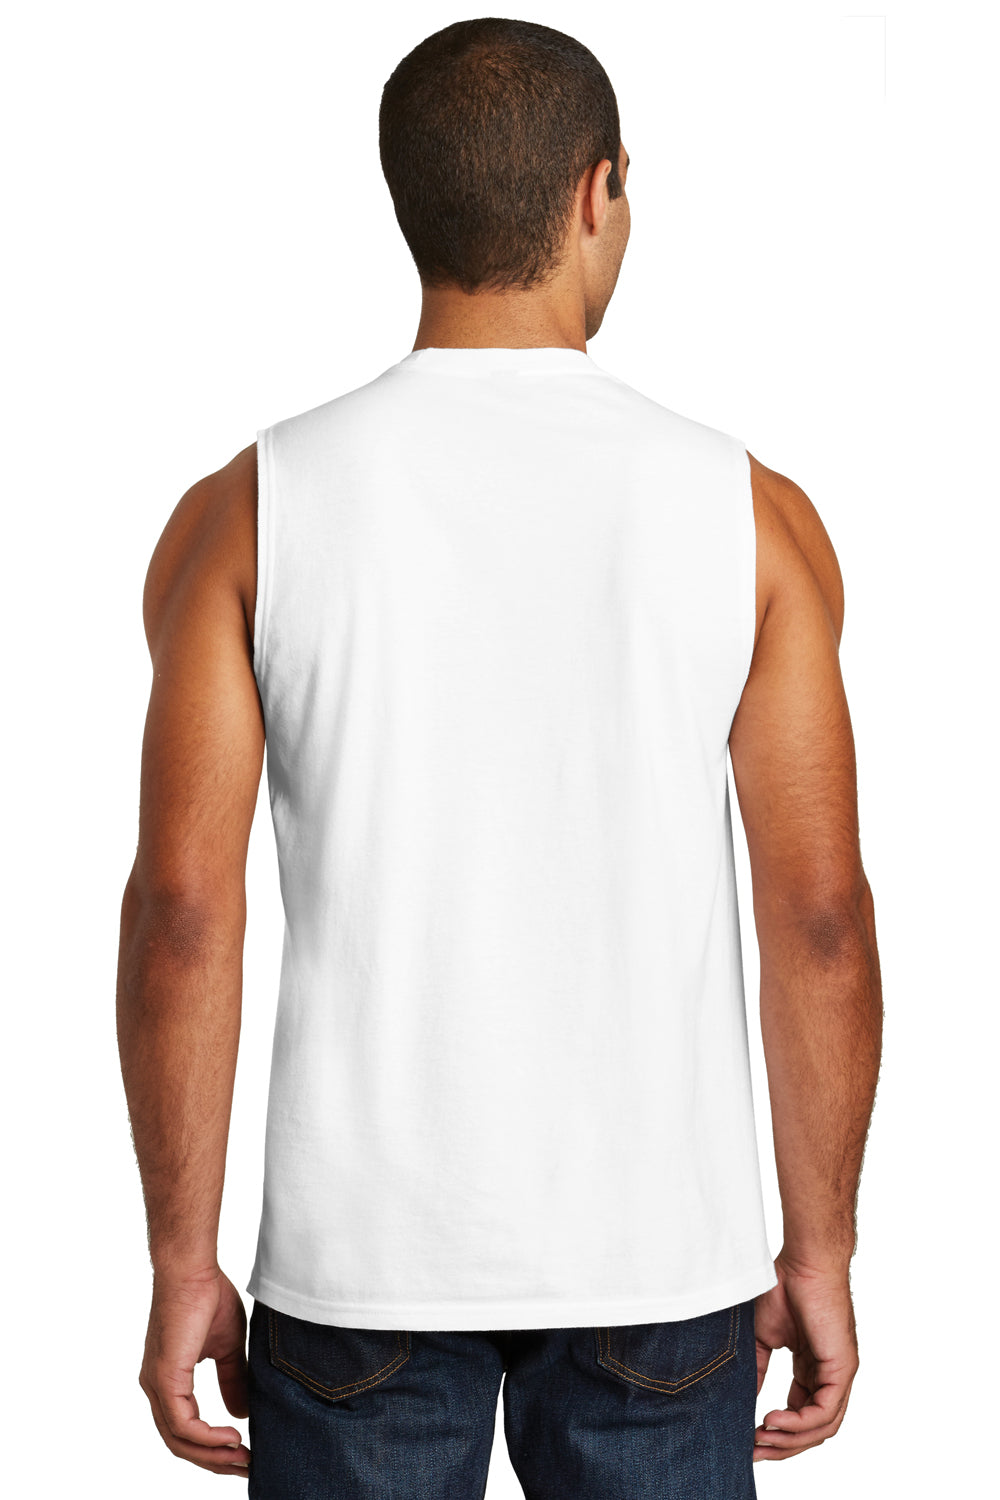 District DT6300 Mens Very Important Muscle Tank Top White Back